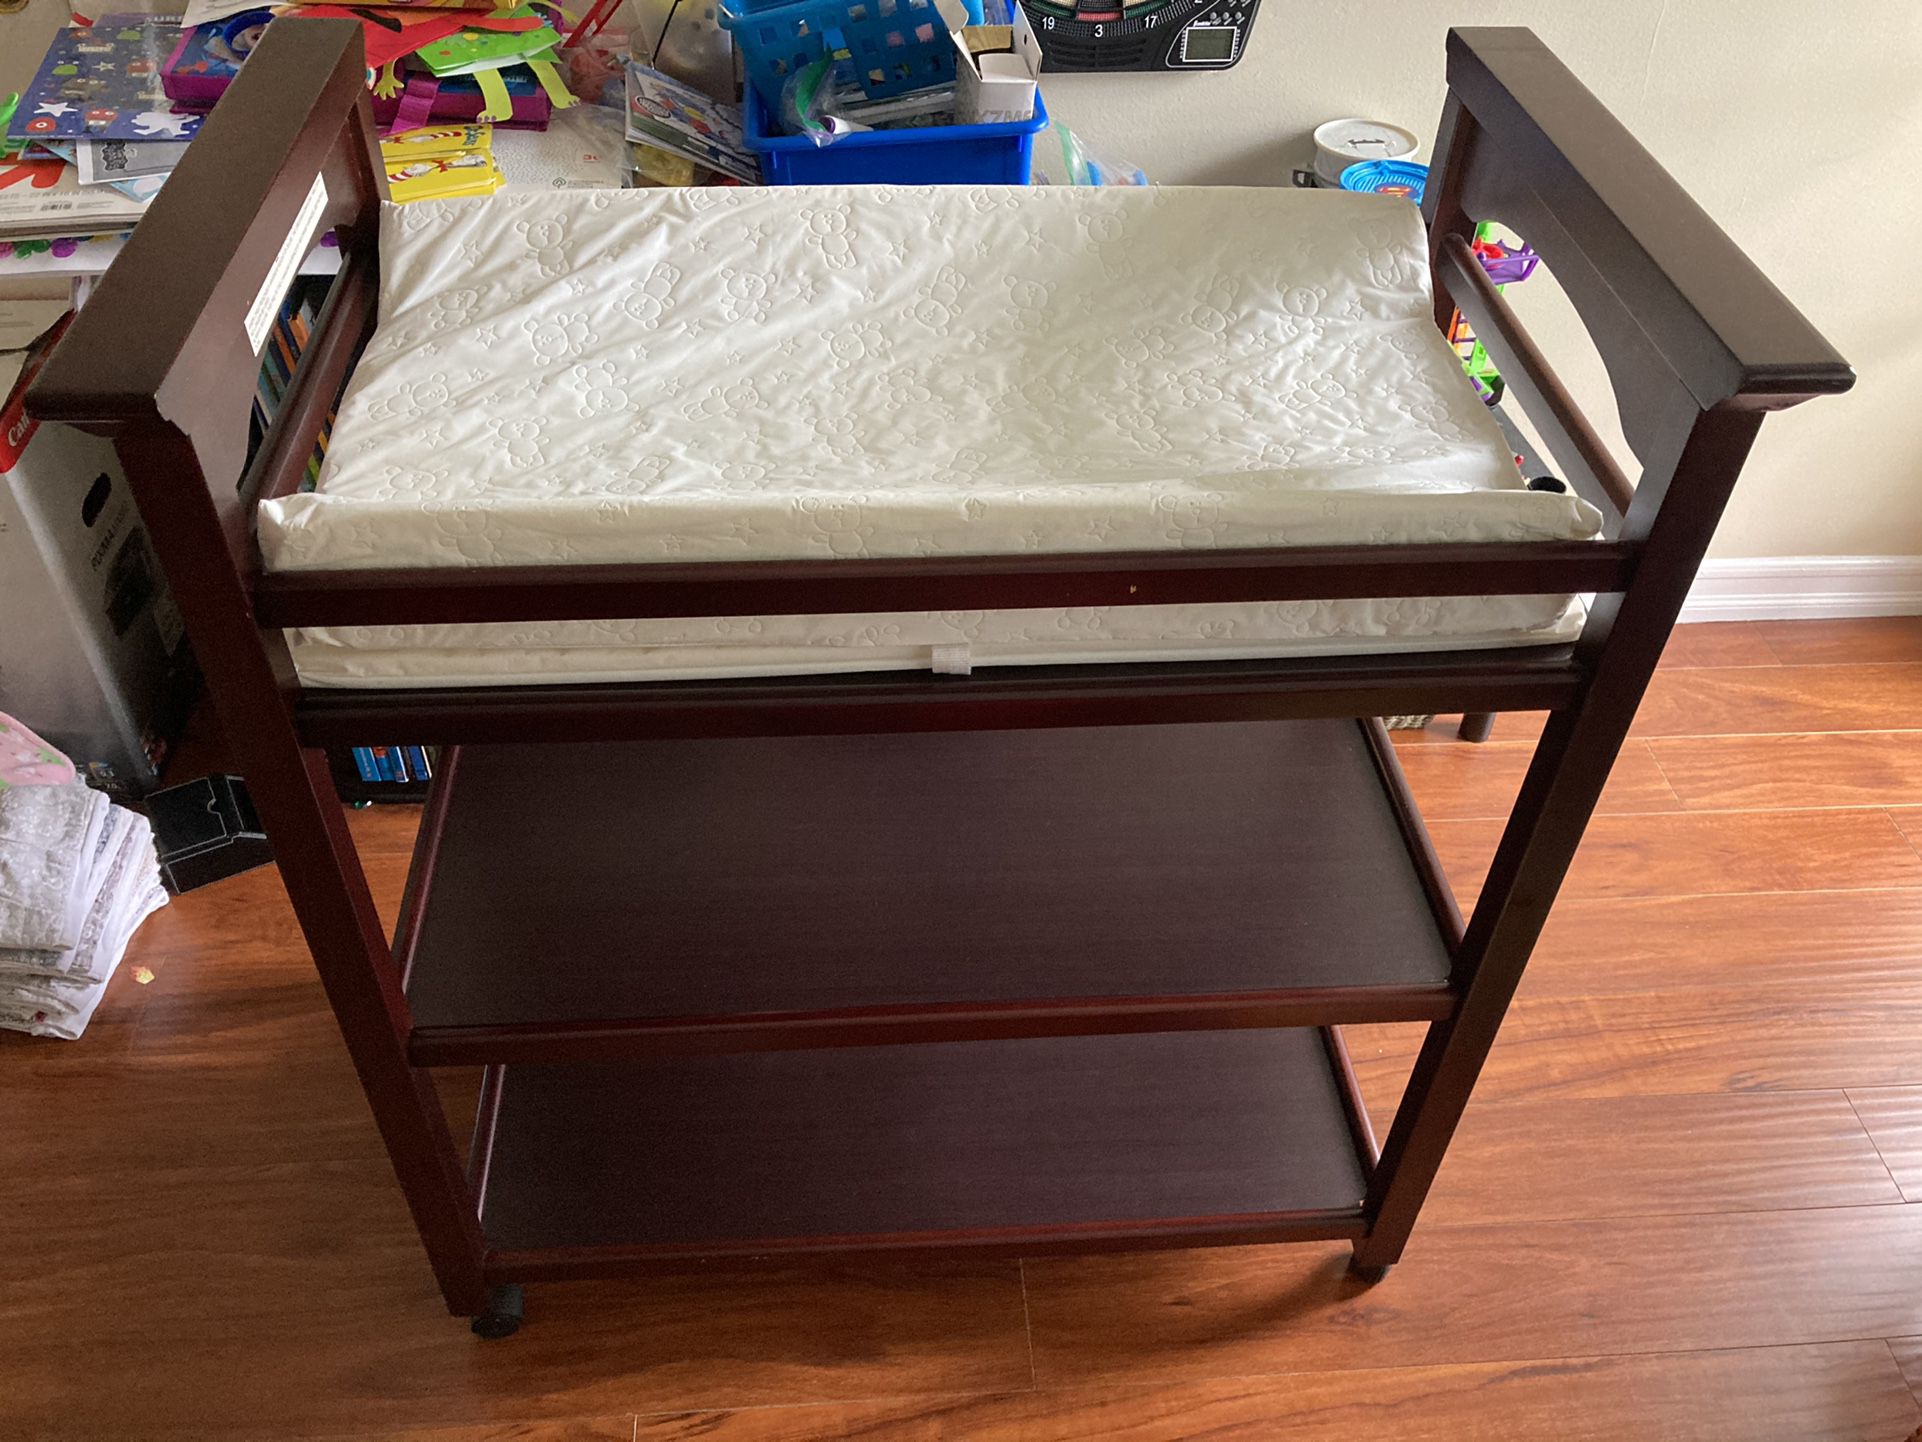 GRACO BABY CHANGING TABLE WITH ADDITIONAL CHANGING PAD